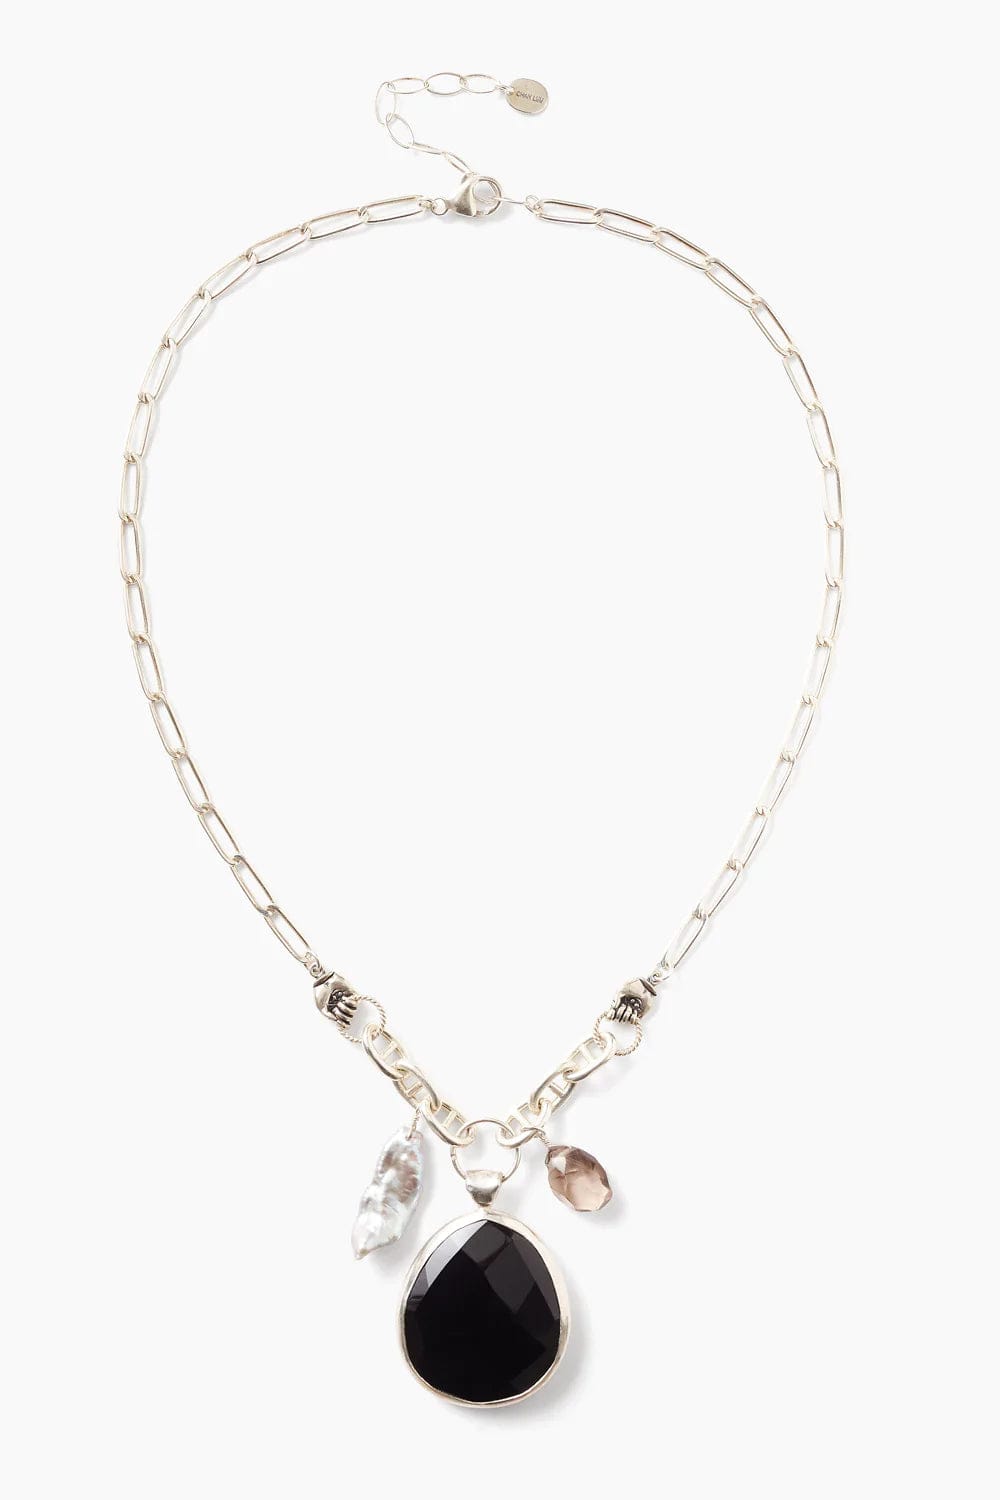 NKL Onyx Theta Necklace - Limited